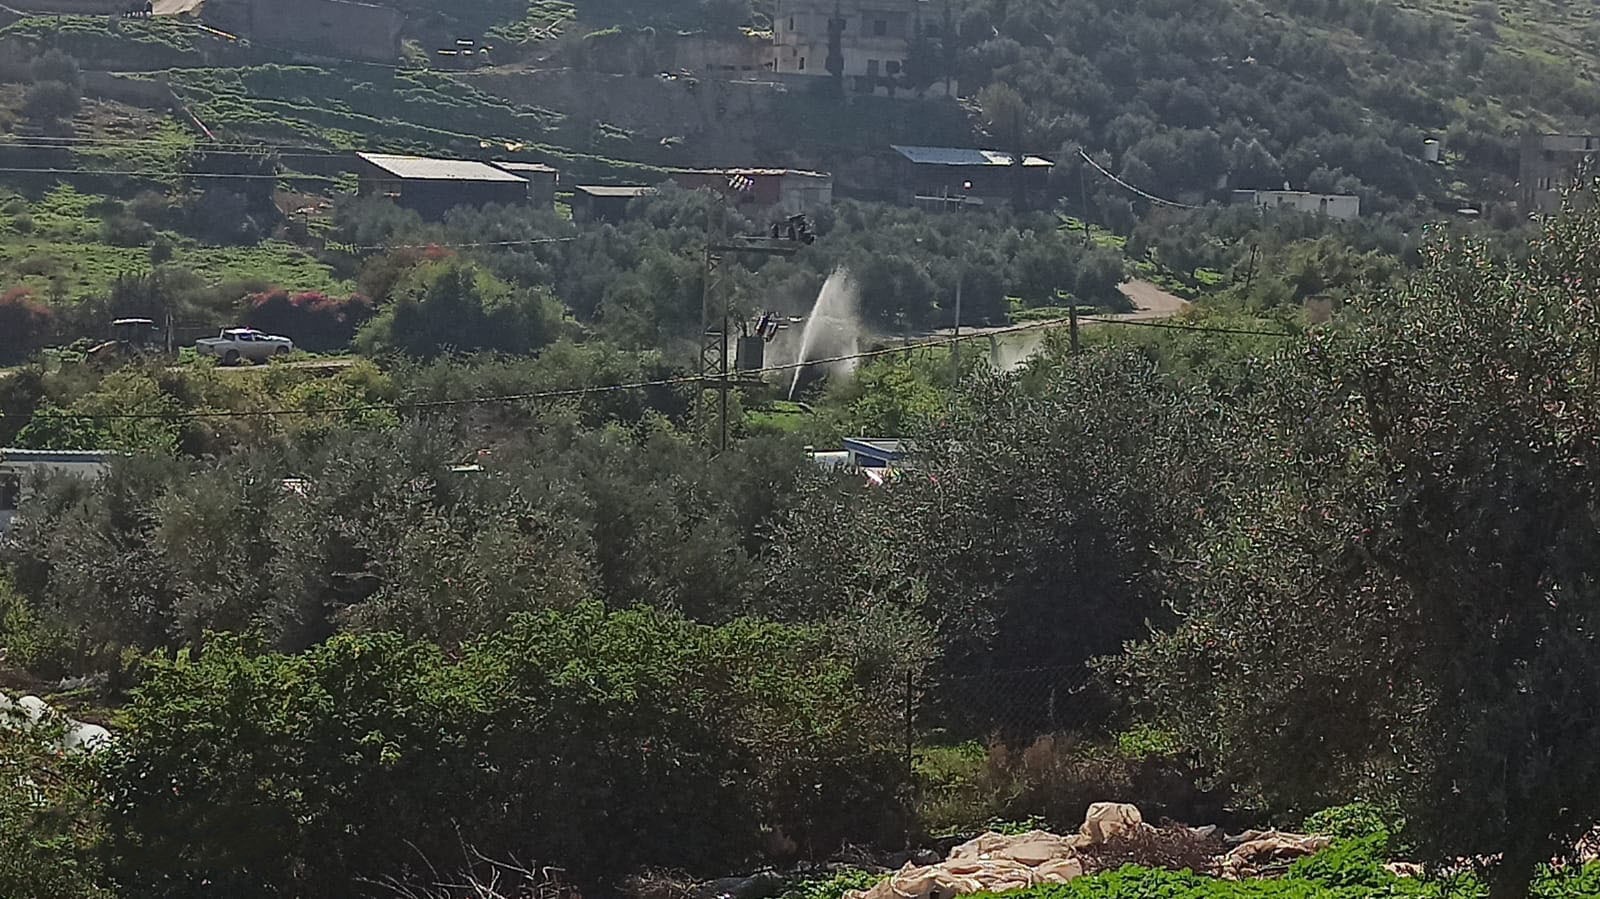 Photo taken from uphill, showing a green landscape with houses and cars in the distance. In the middle, a powerful gush of water.